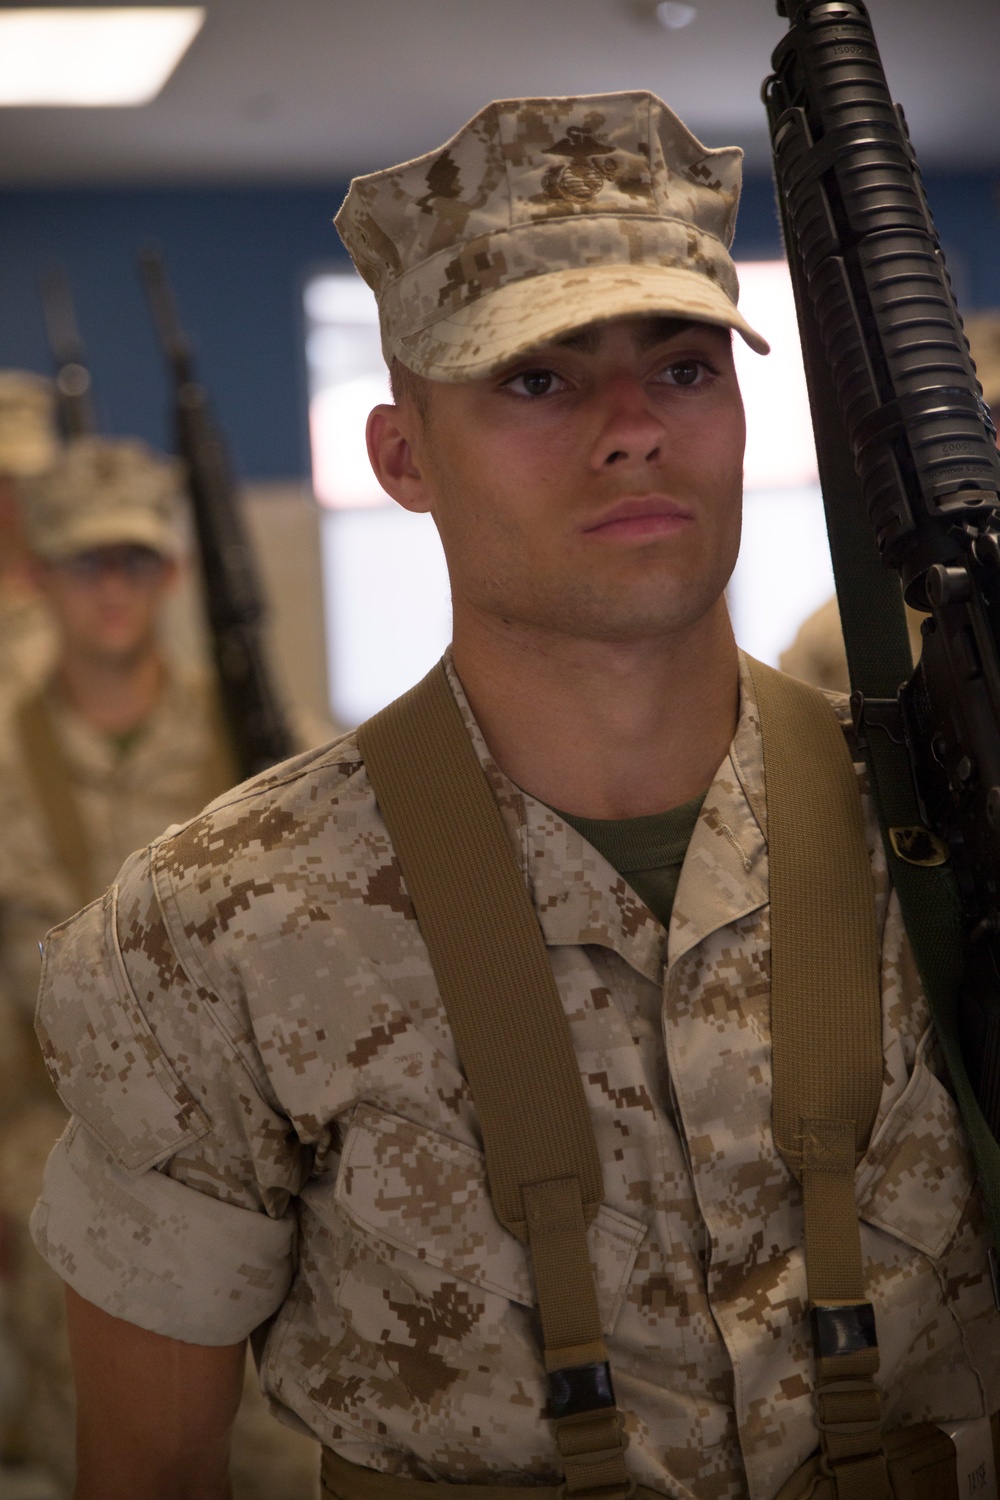 Statesville, N.C., native training at Parris Island to become U.S. Marine